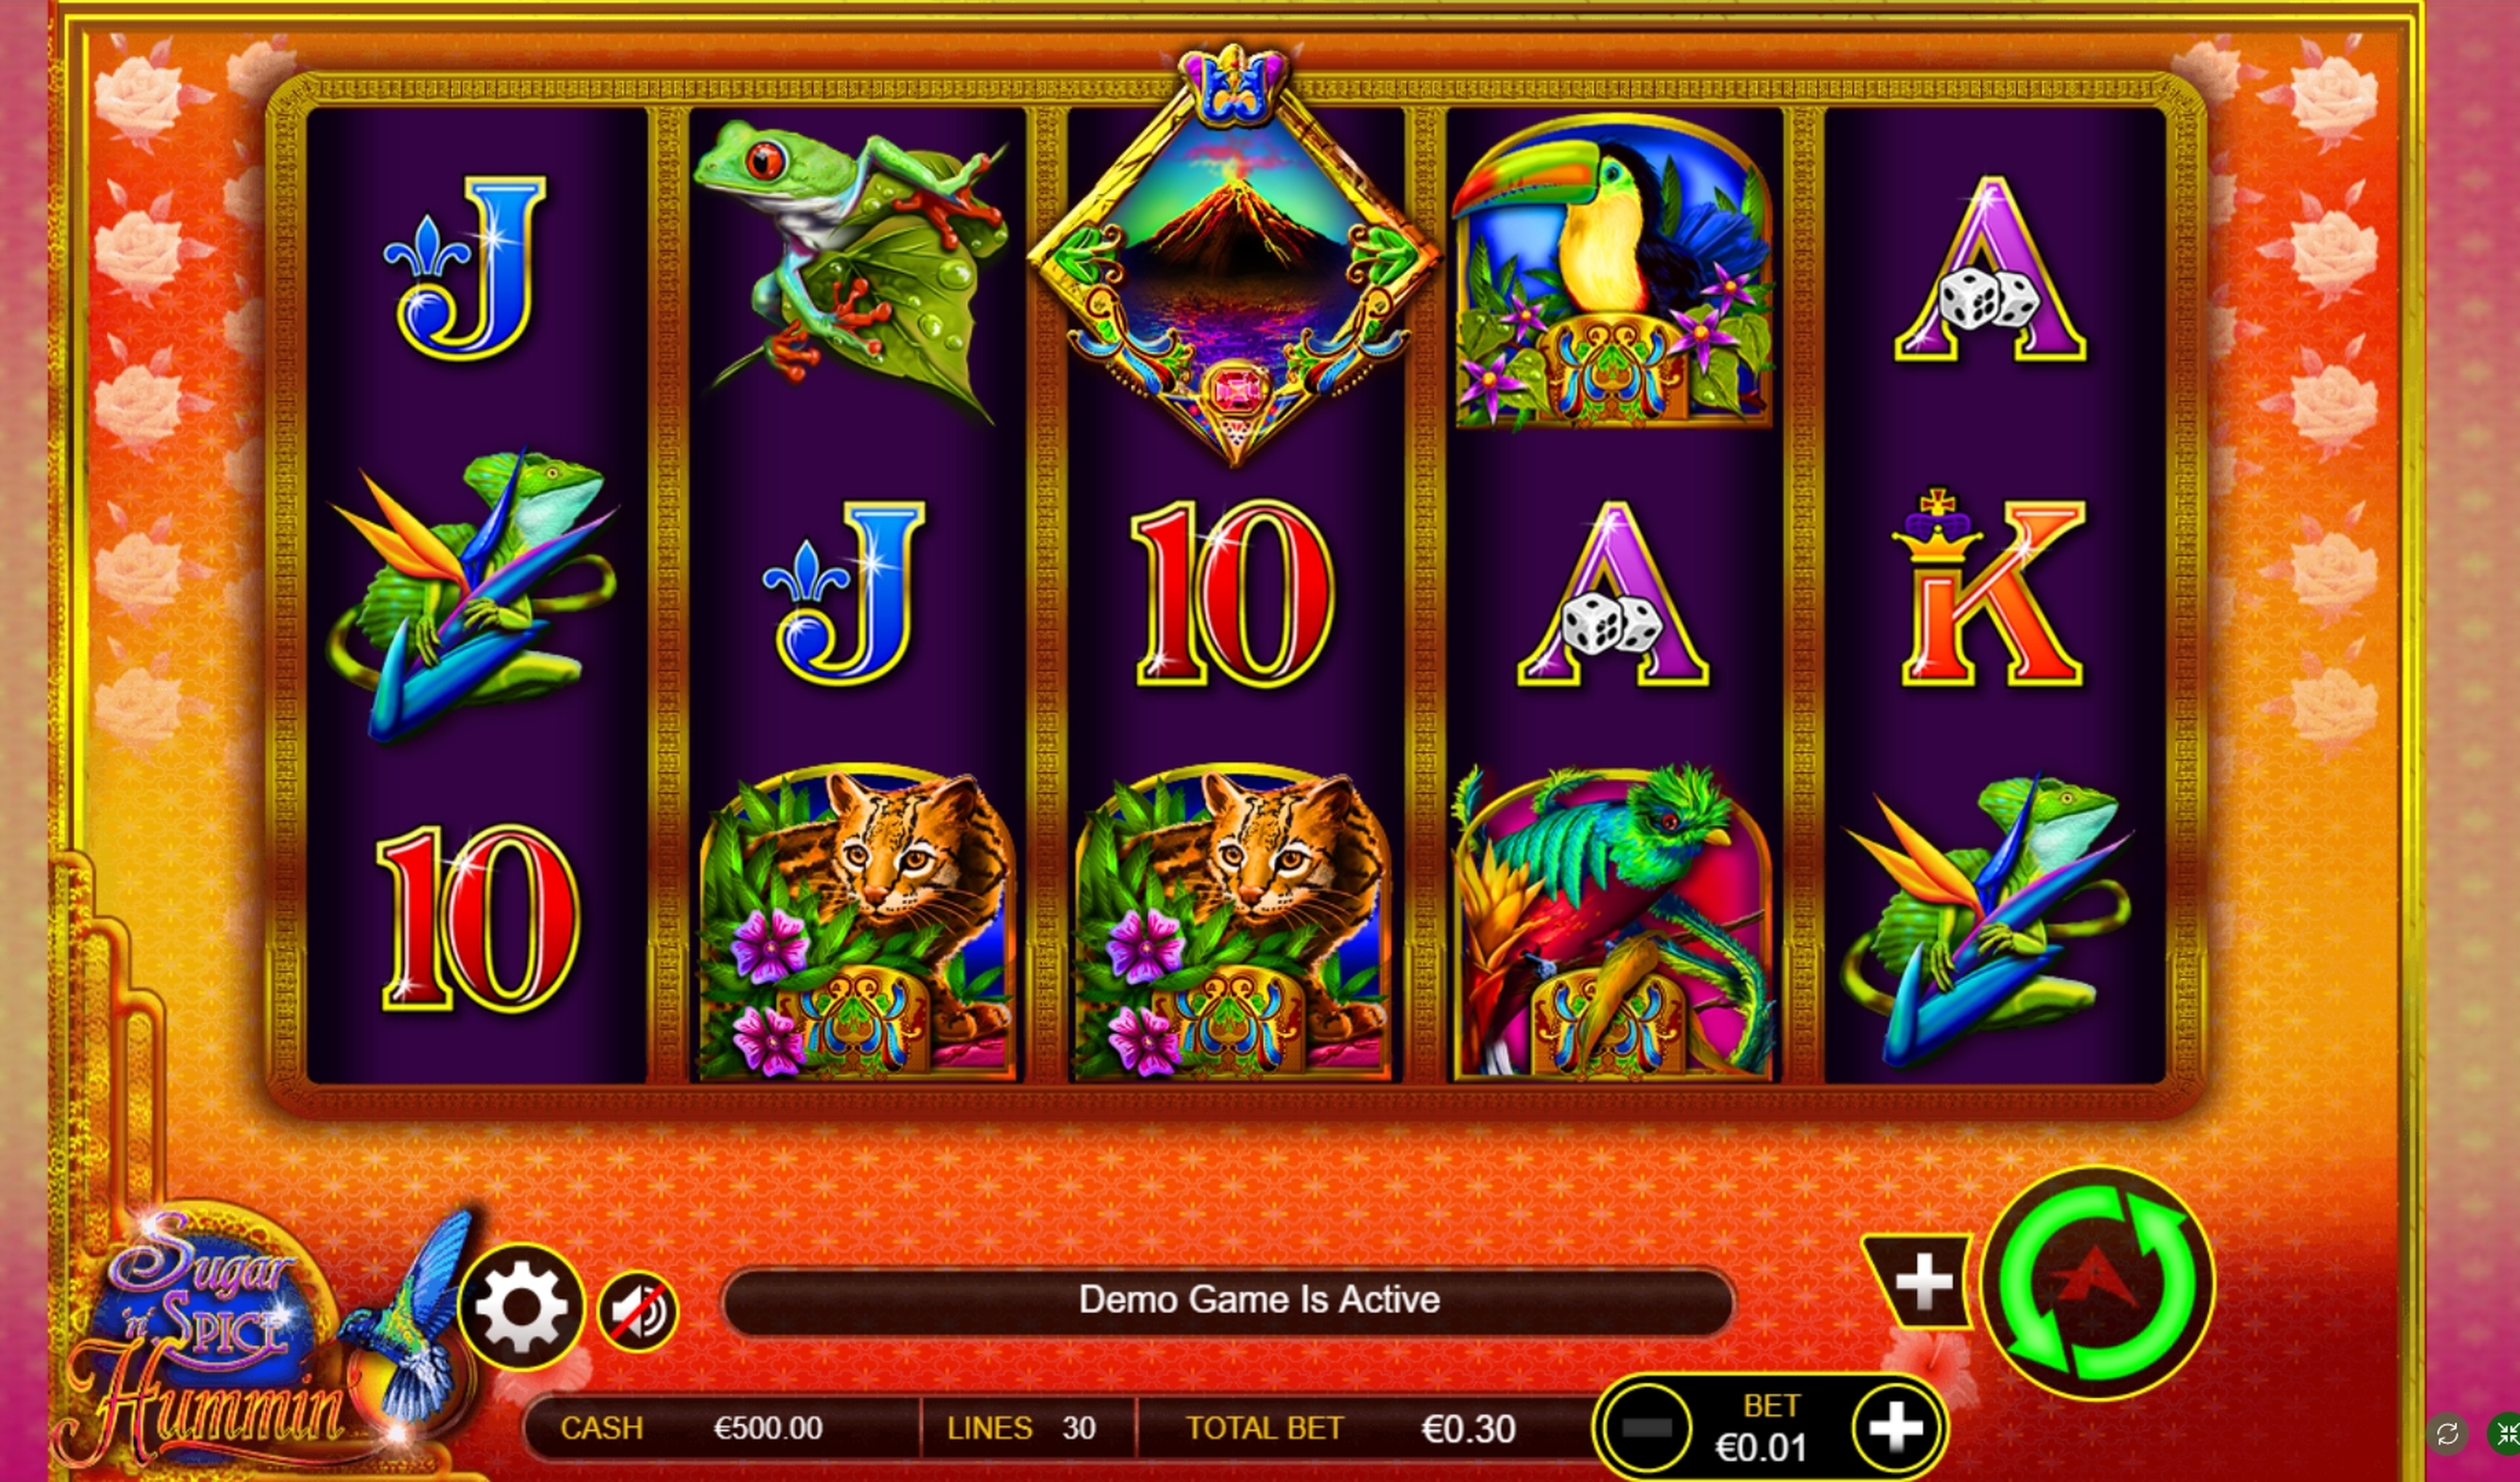 Reels in Sugar 'n' Spice Hummin' Slot Game by Ainsworth Gaming Technology